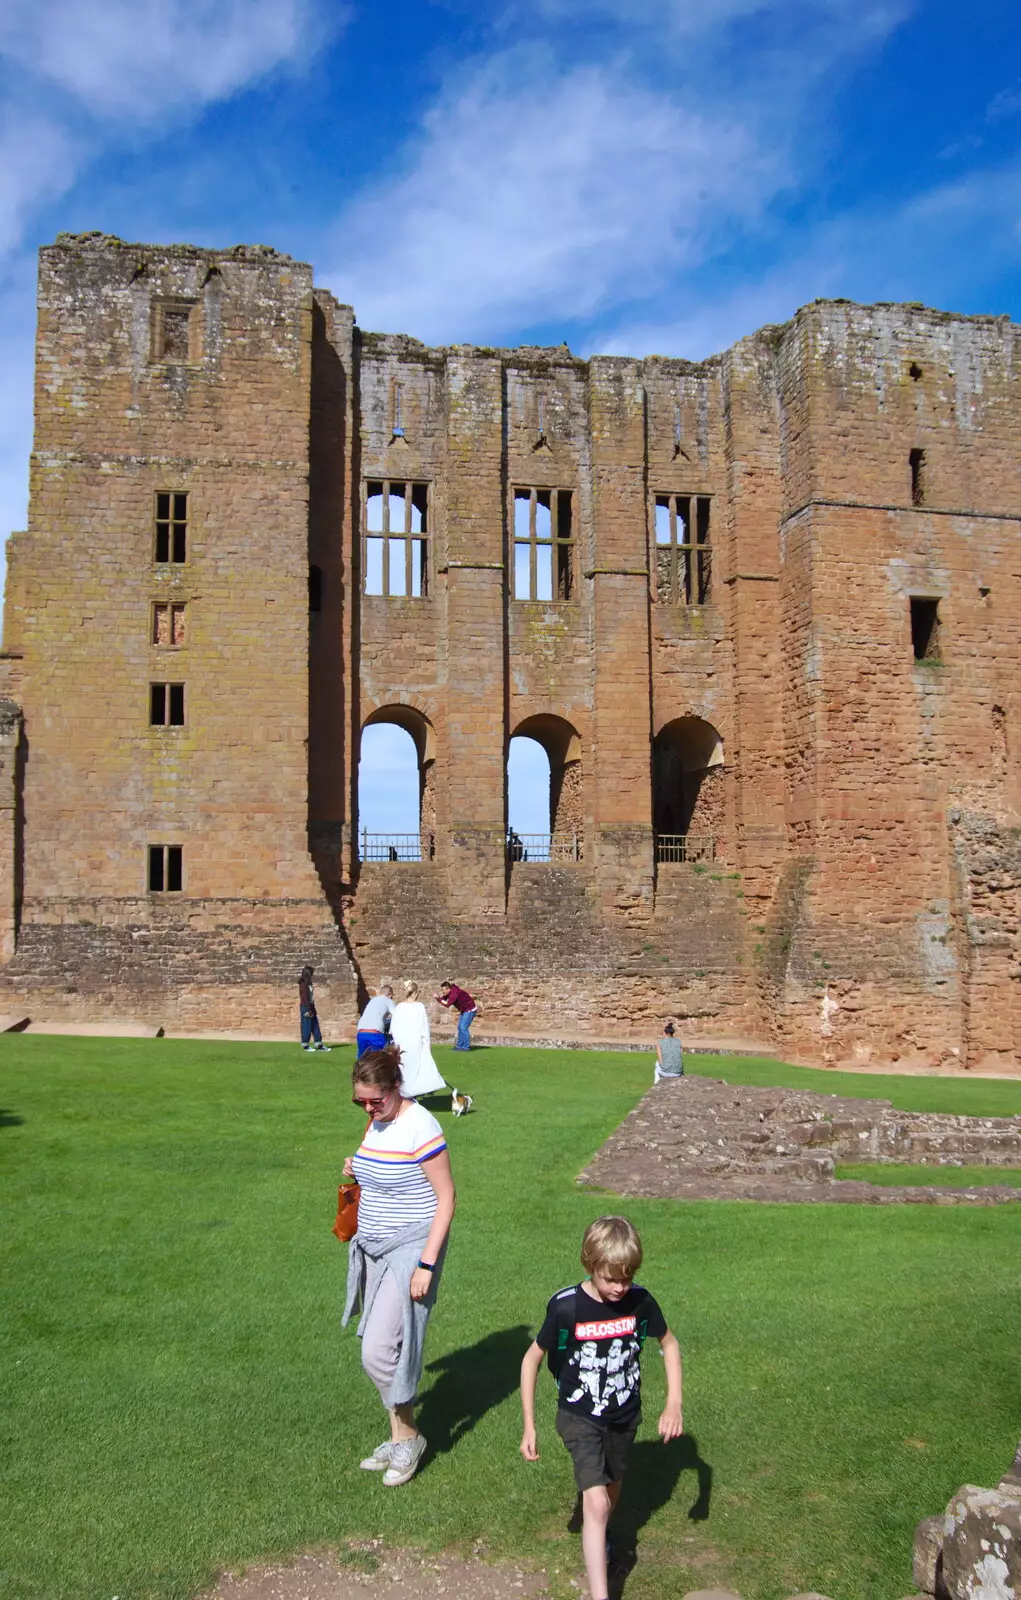 Isobel and Harry roam around in front of the older keep, from Kenilworth Castle and the 69th Entry Reunion Dinner, Stratford, Warwickshire - 14th September 2019